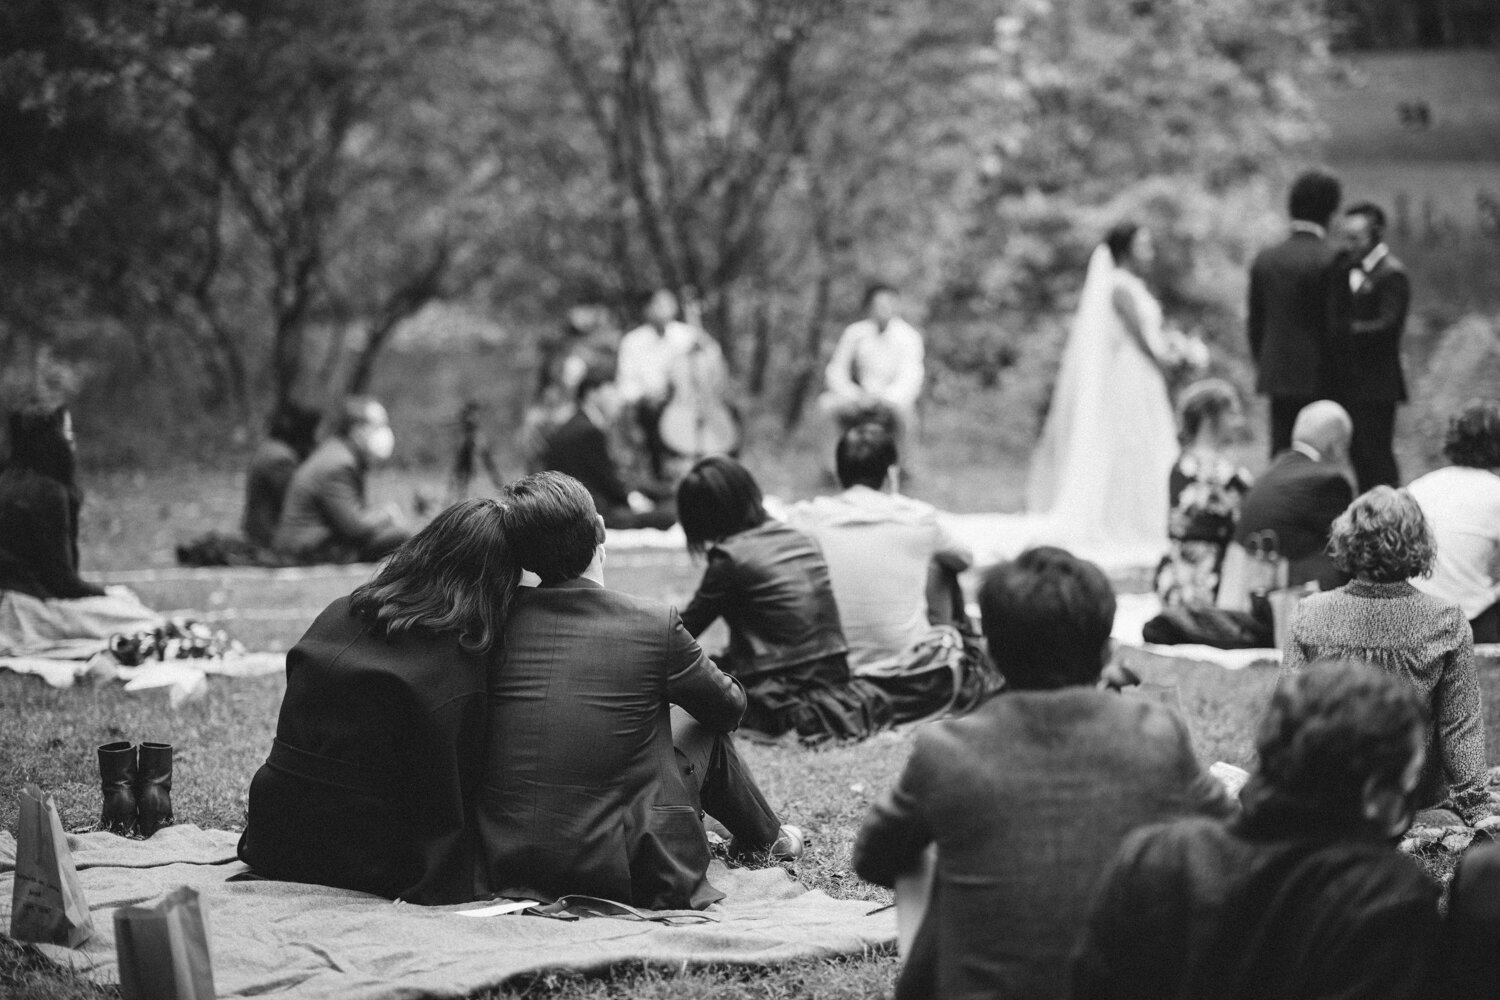 Wedding guests are sitting on blankets in Central Park looking on at the bride and groom.

Central Park Wedding Photography. Williamsburg Bridge Bridal Portraits. Luxury NYC Wedding Photographer. Manhattan Micro Wedding.